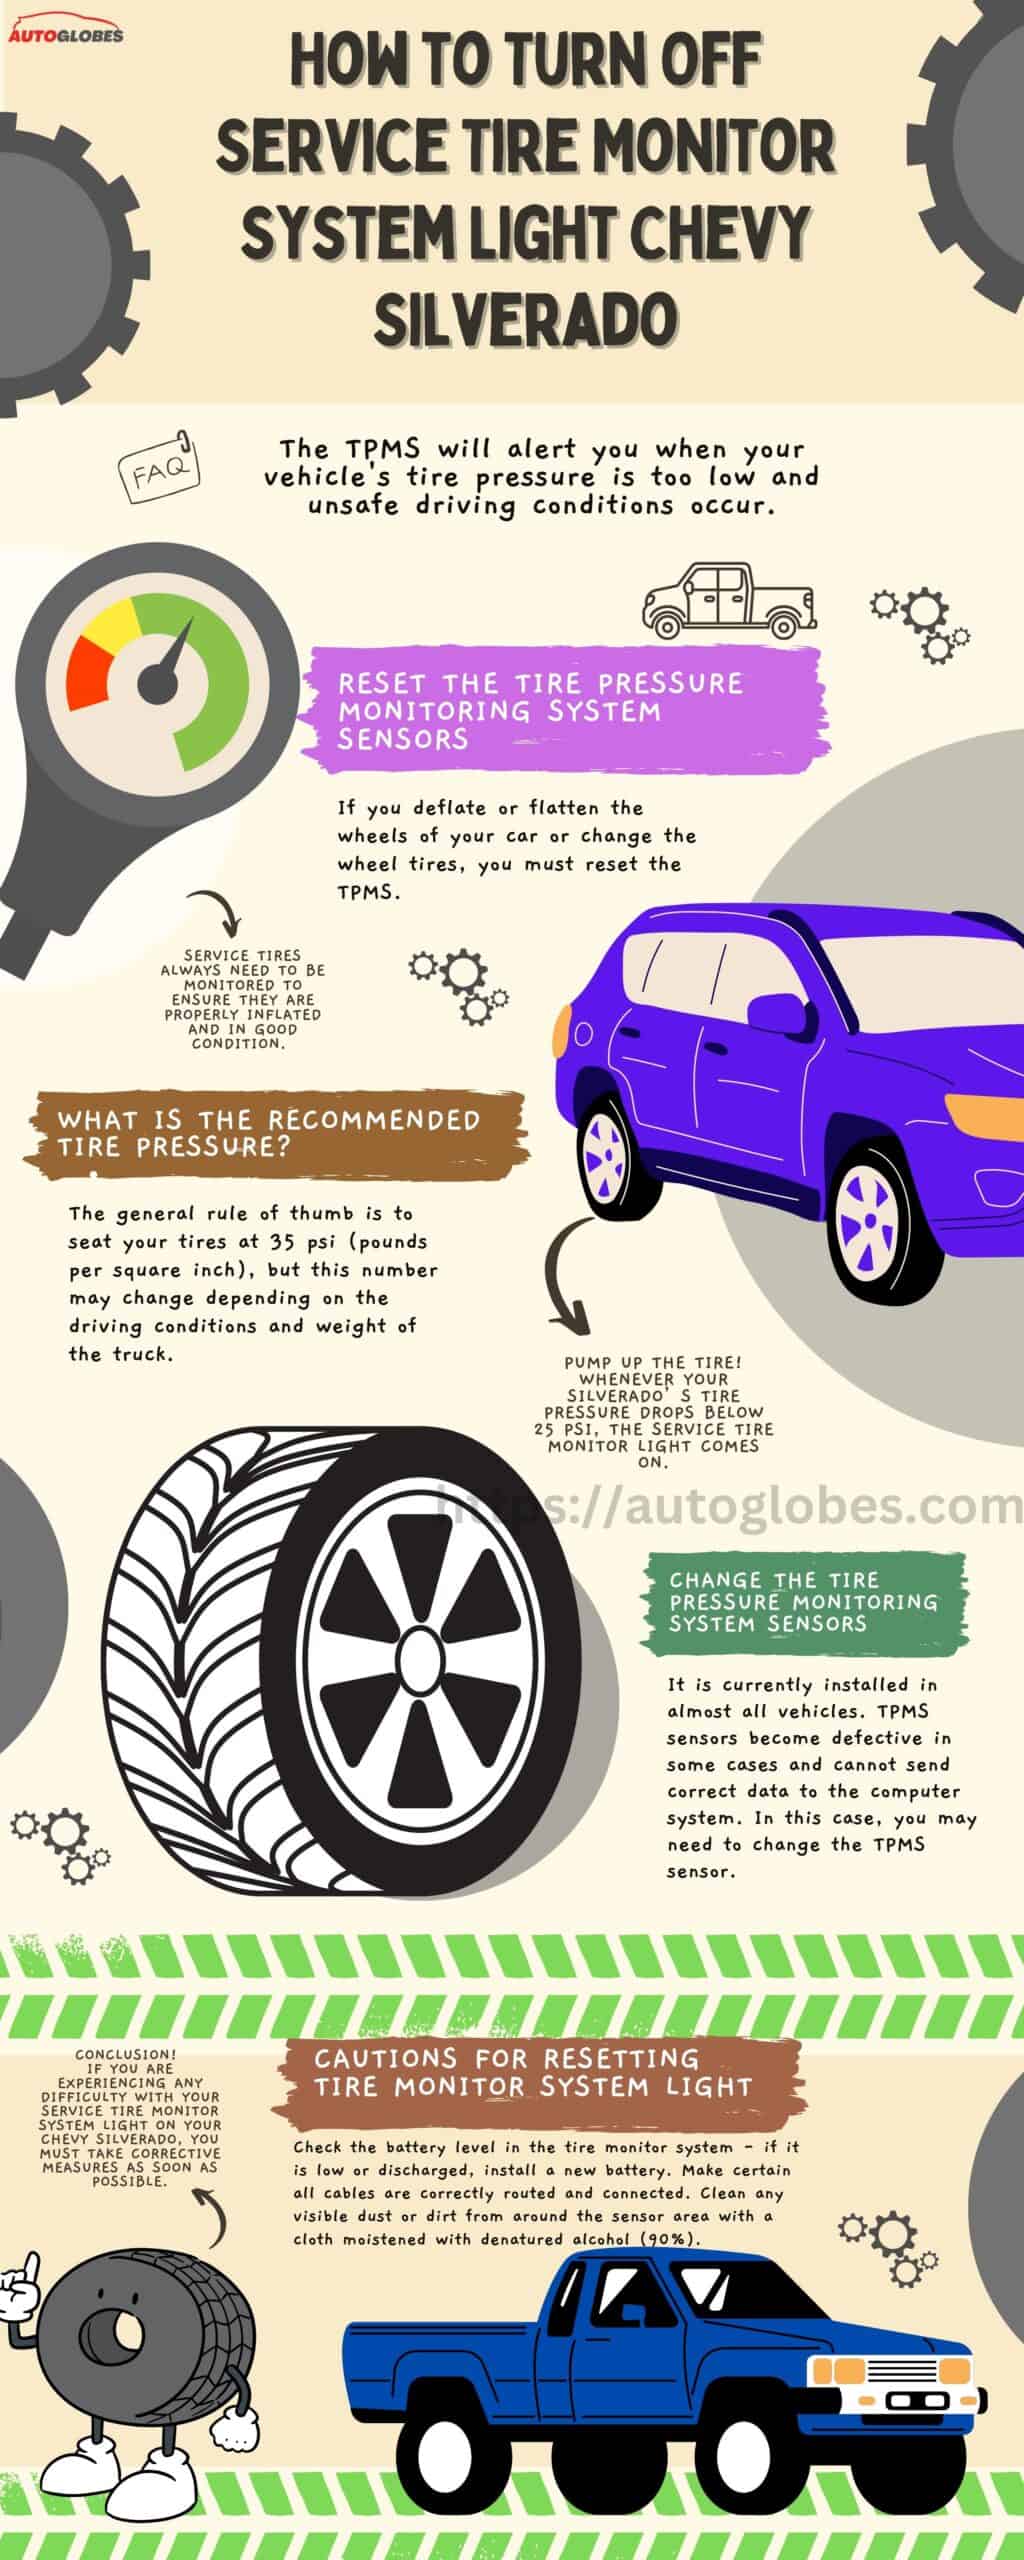 Steps to Turn Off Service Tire Monitor System Light Chevy Silverado infographic